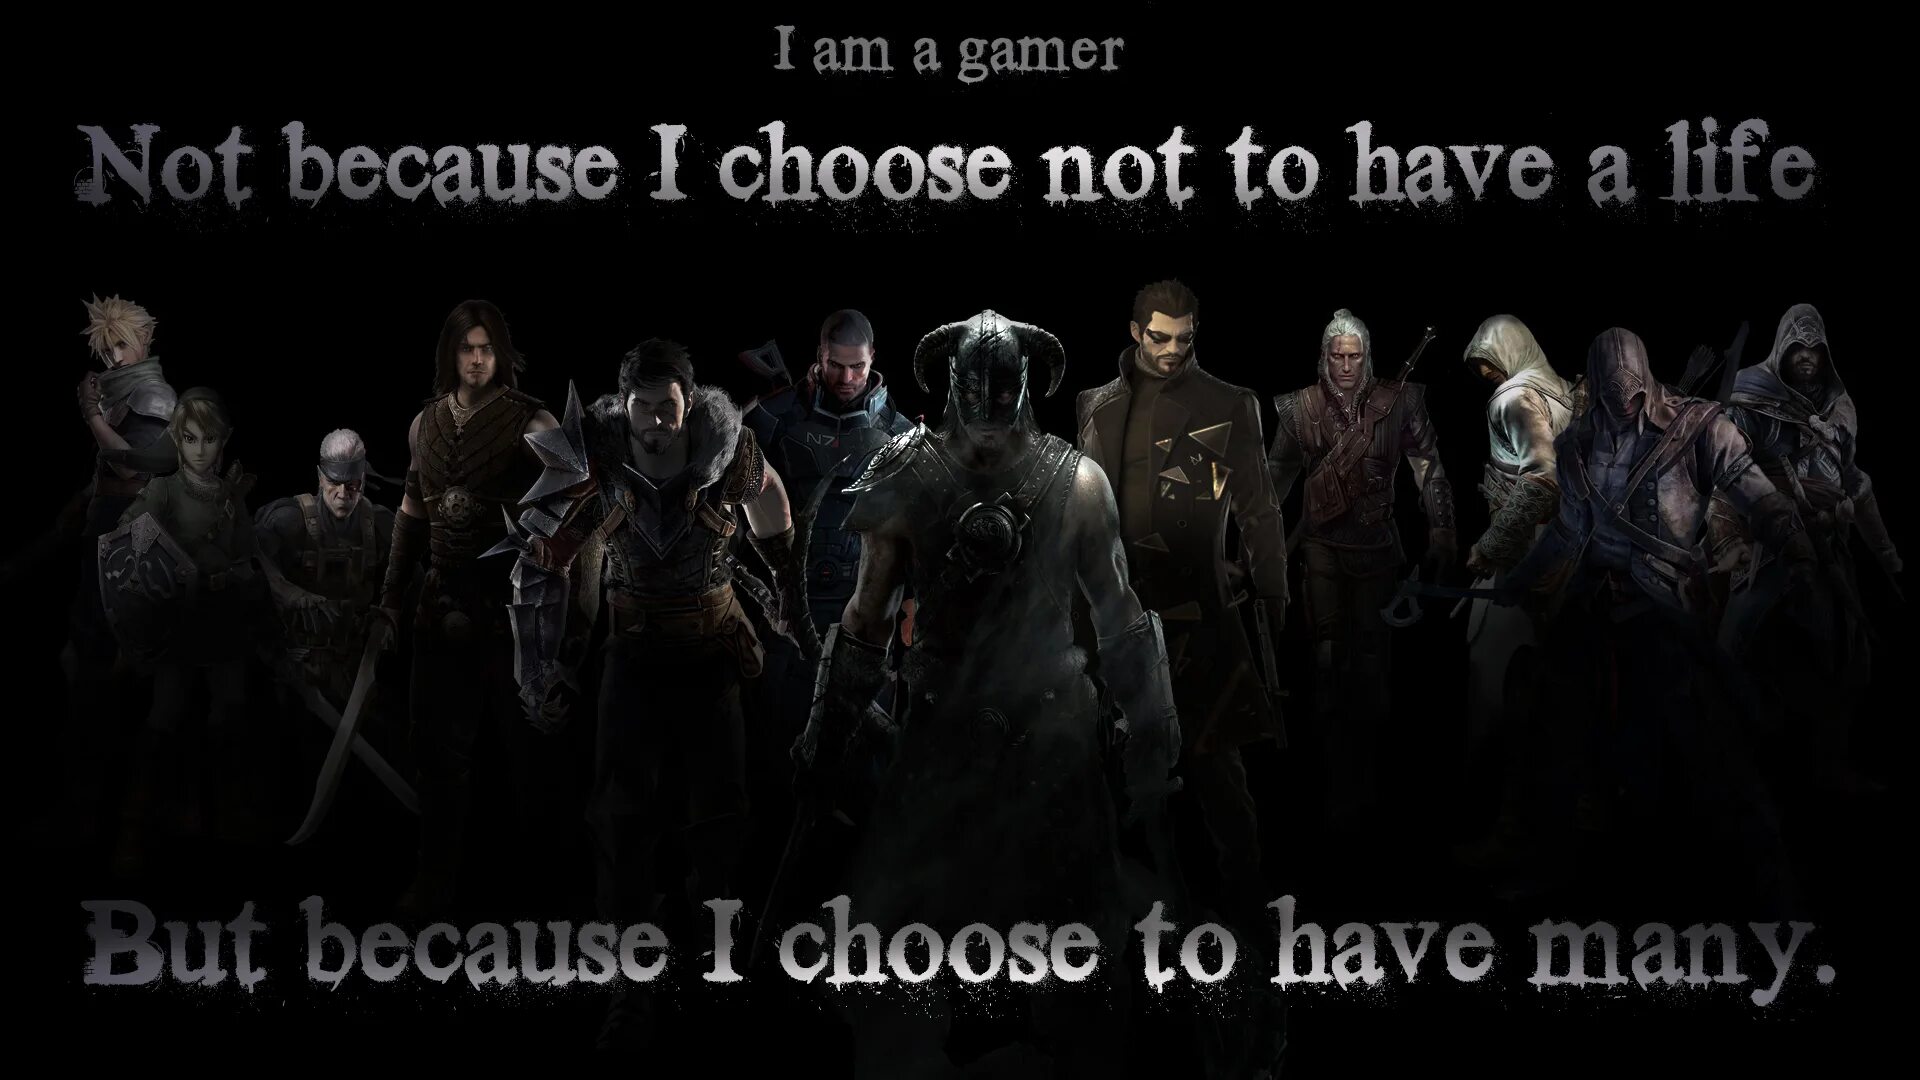 Something similar. I am a Gamer. Not a Gamer. Because i have. I have many.